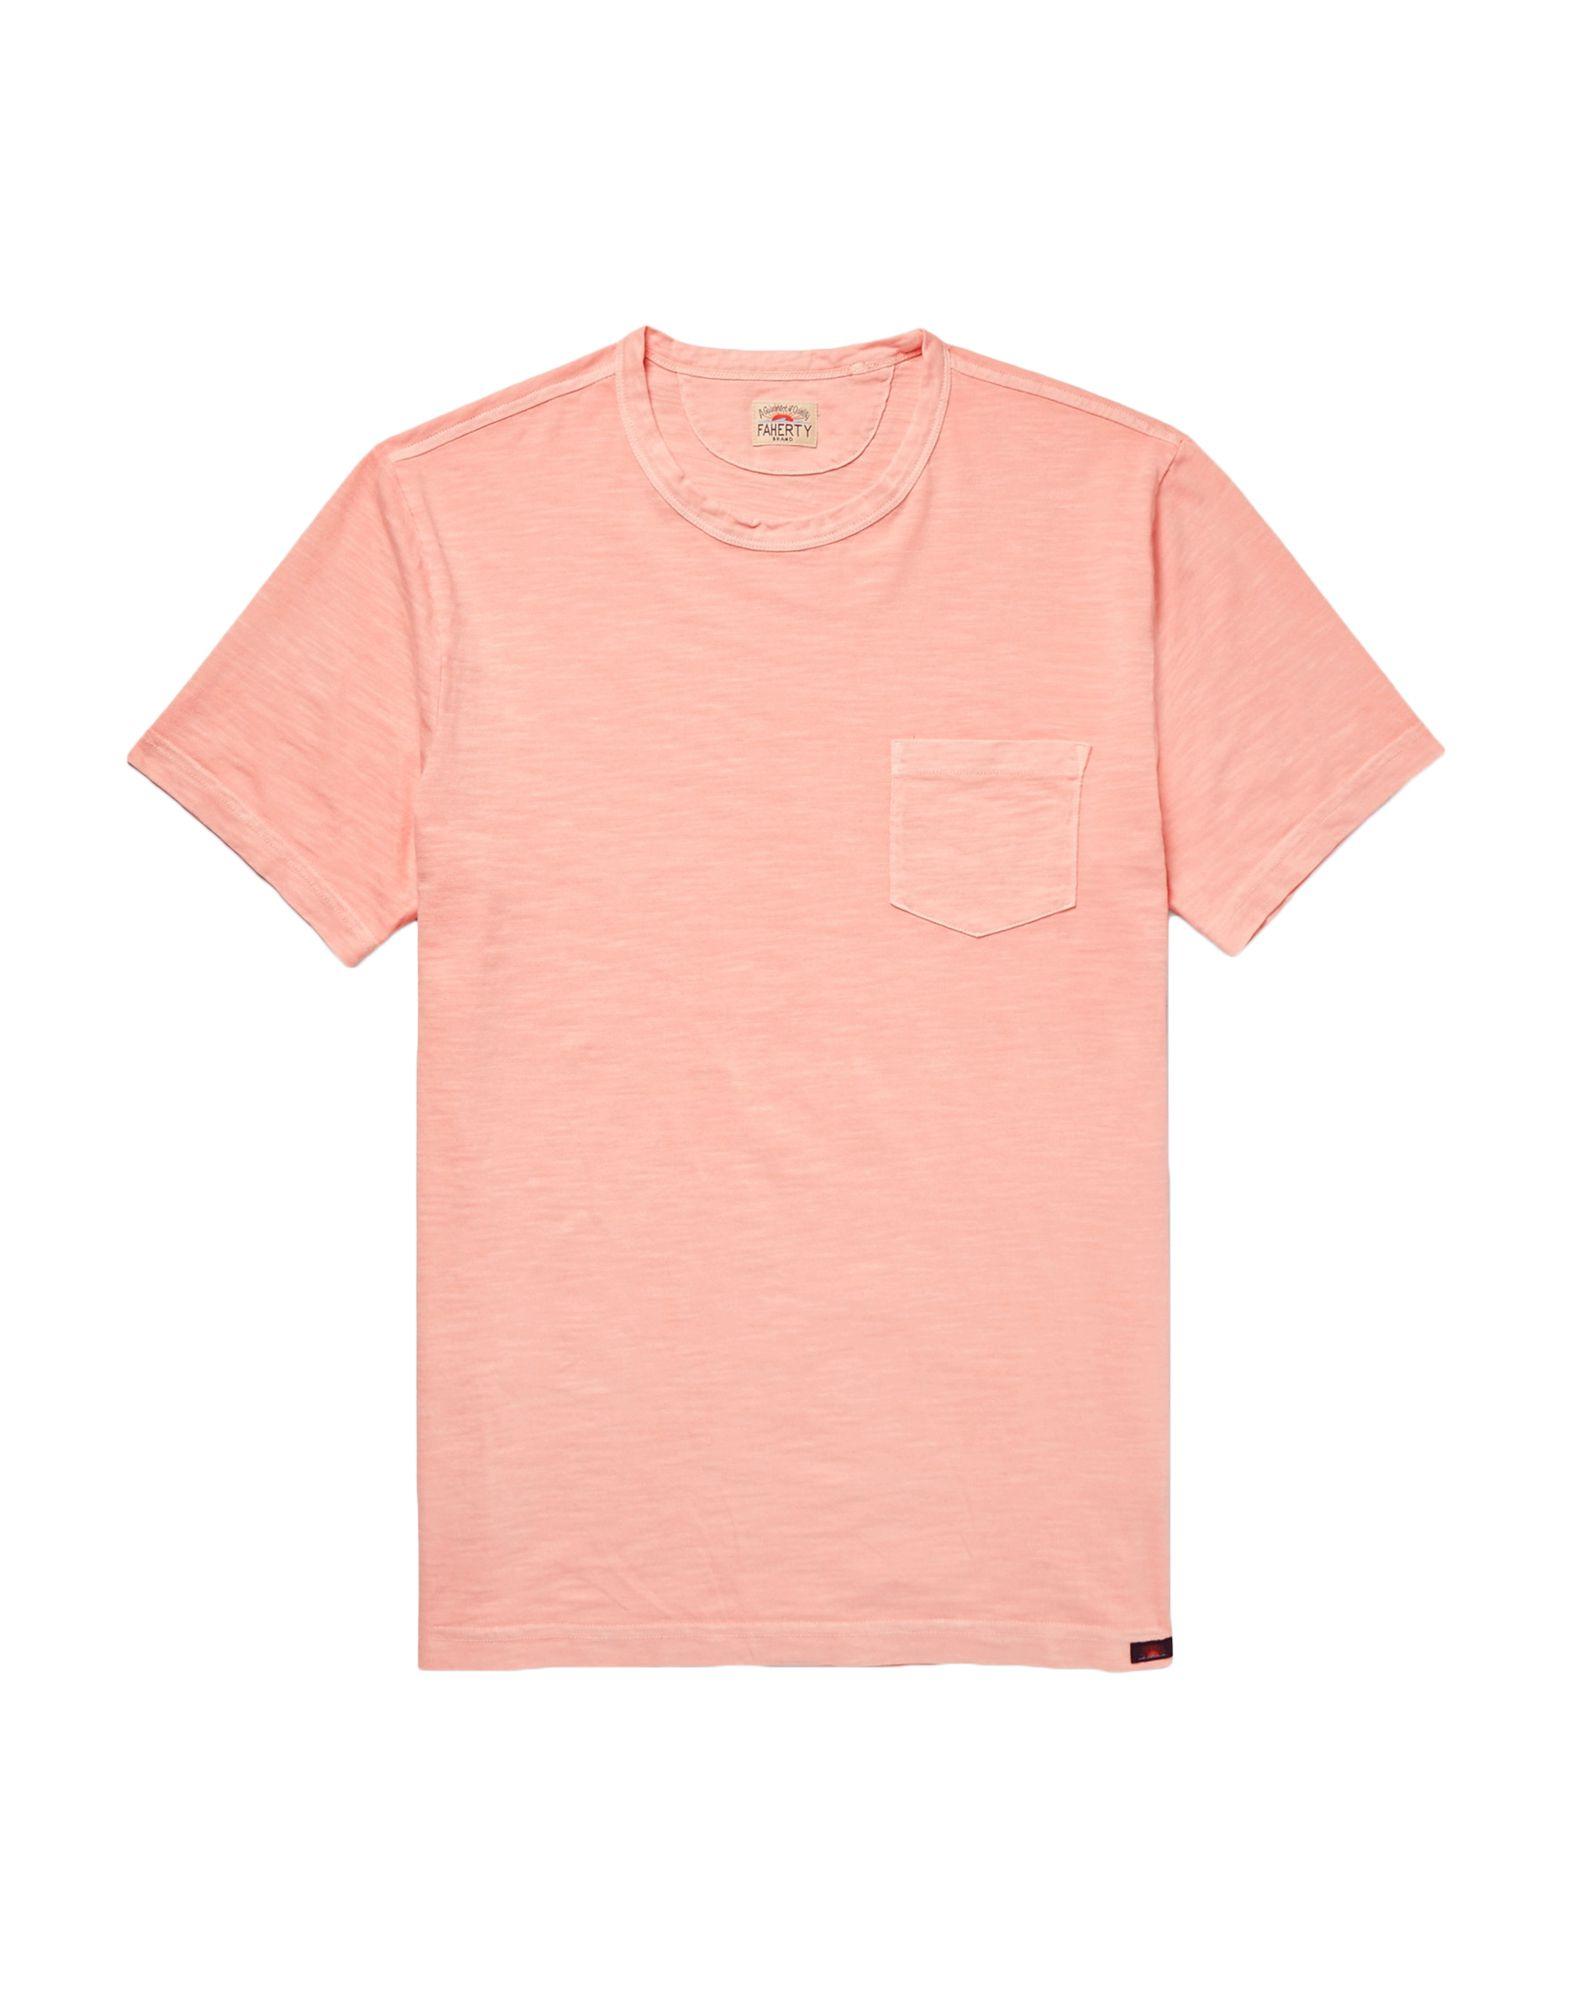 Faherty Brand Cotton T-shirt in Pink for Men - Save 28% - Lyst